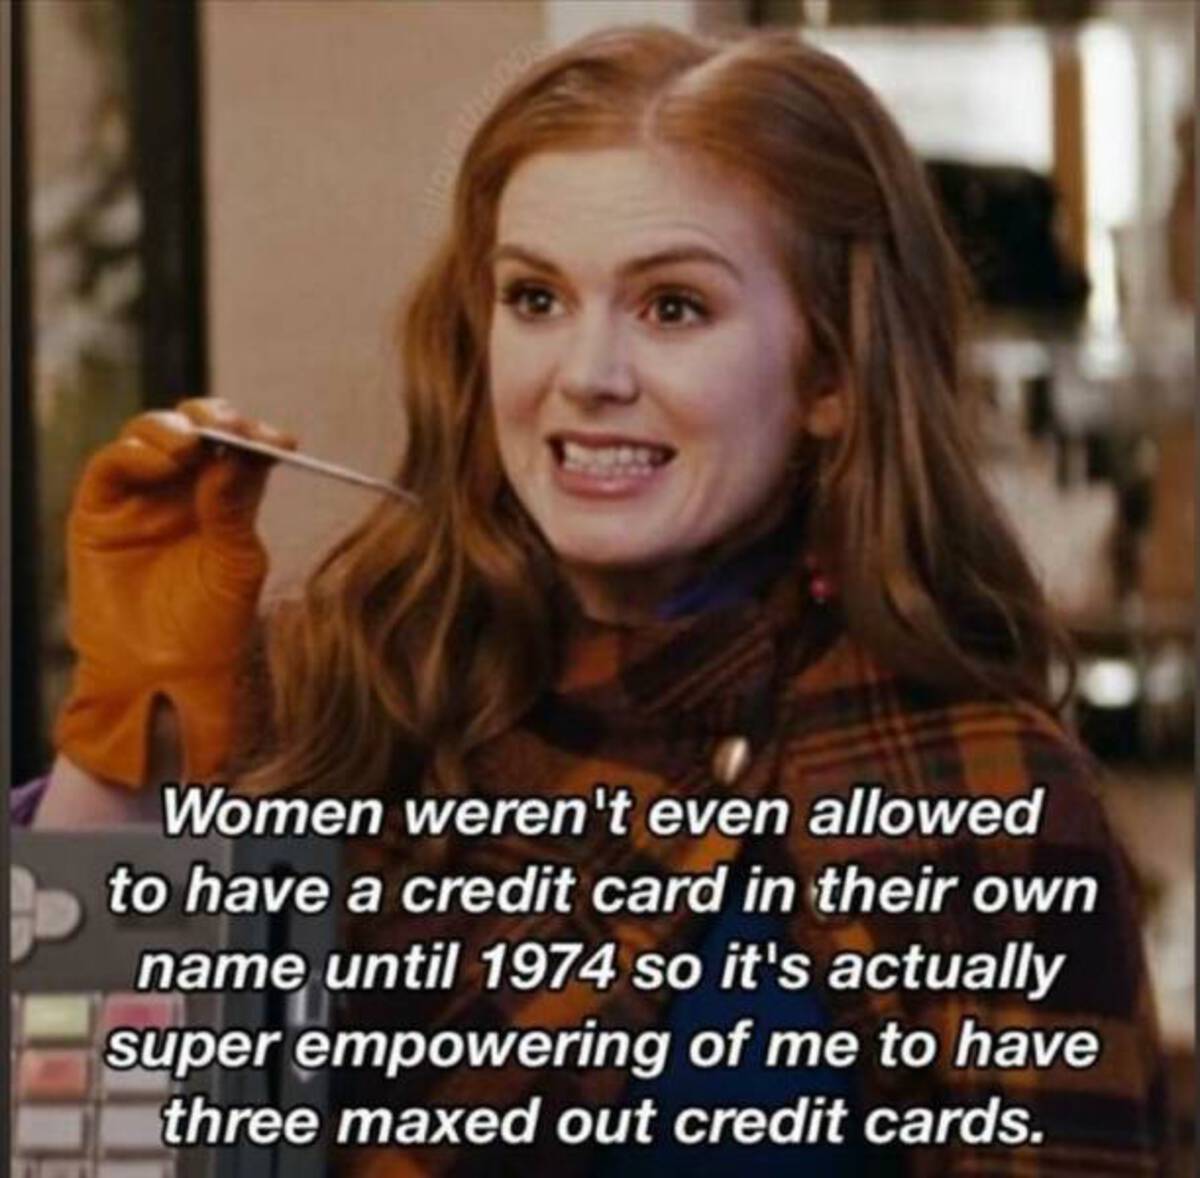 girl - Women weren't even allowed to have a credit card in their own name until 1974 so it's actually super empowering of me to have three maxed out credit cards.